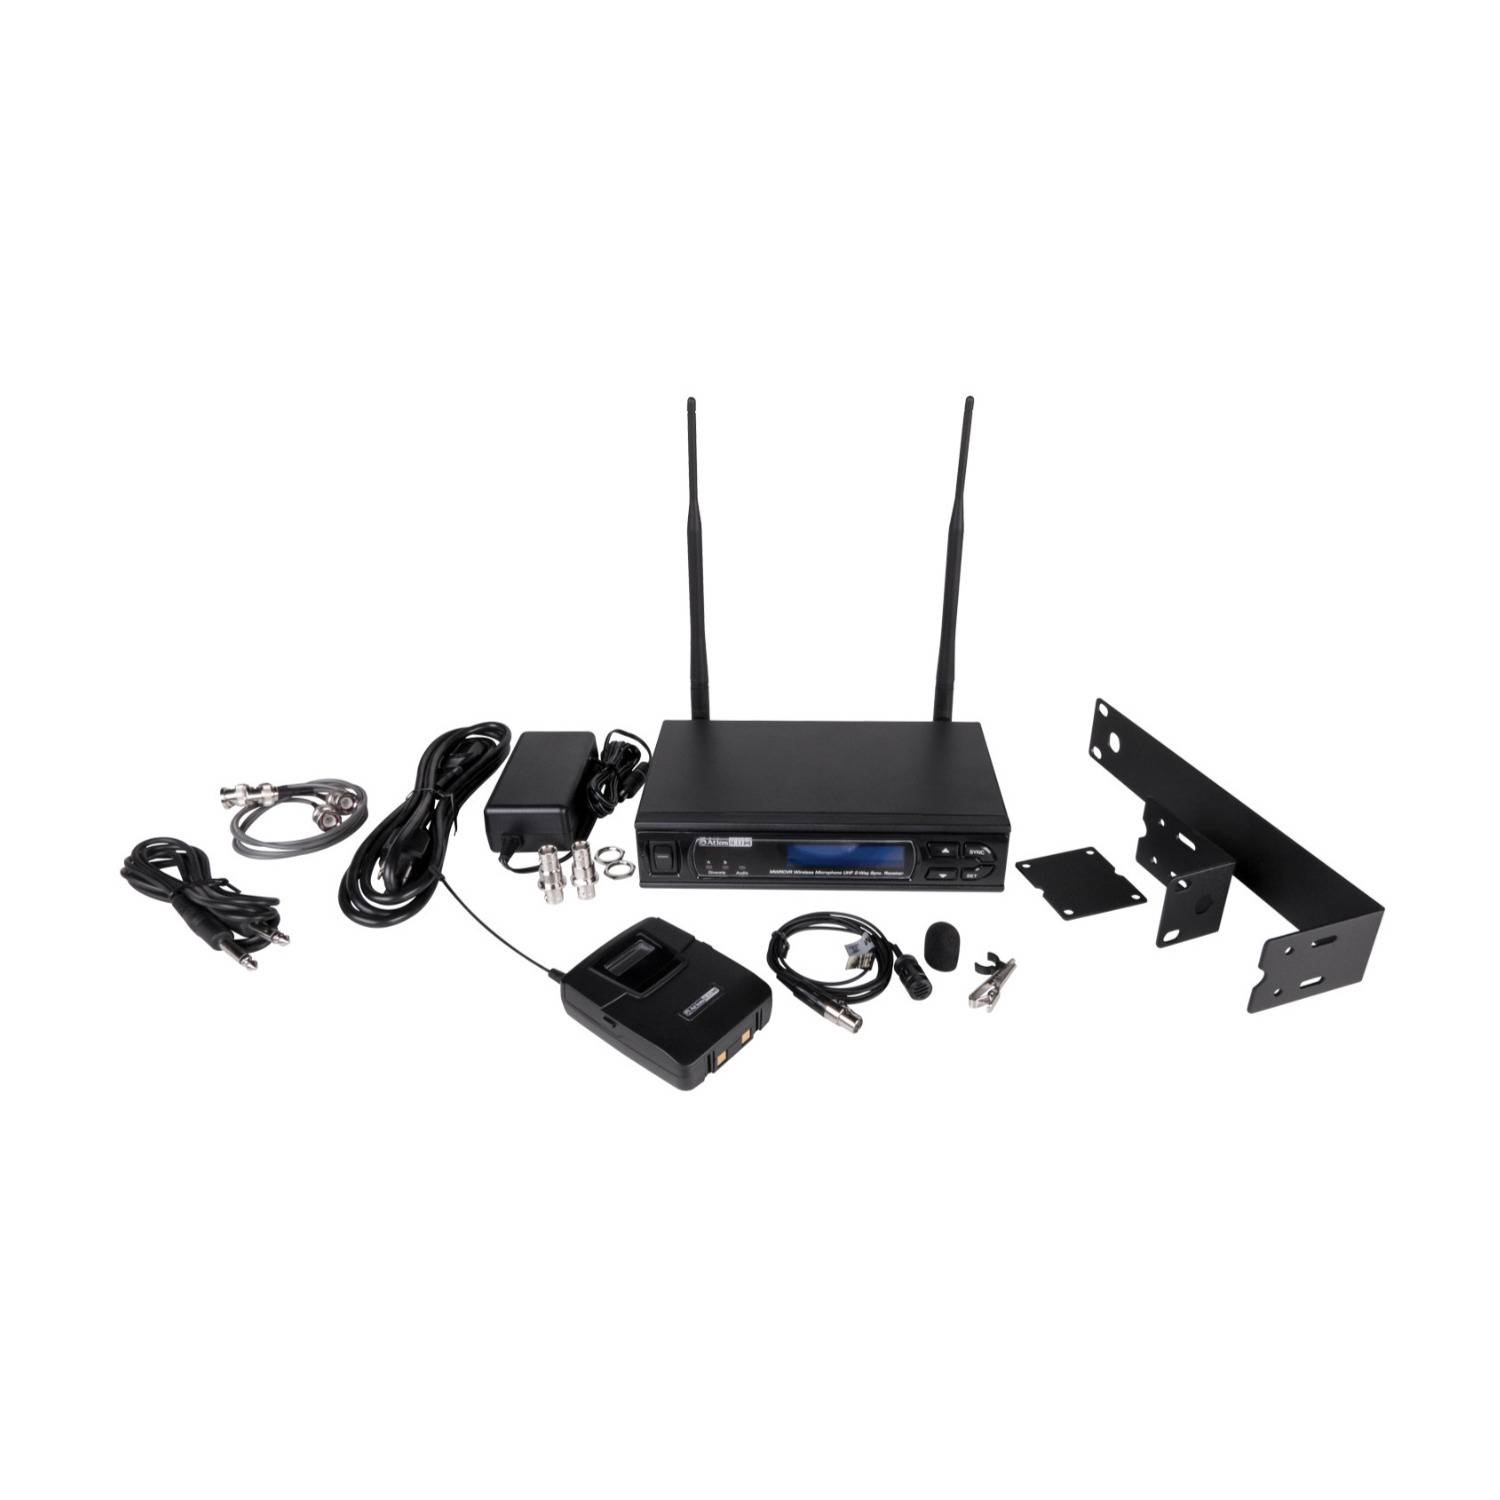 AtlasIED MW100BP-LM Wireless Microphone Kit with Lavalier Microphone